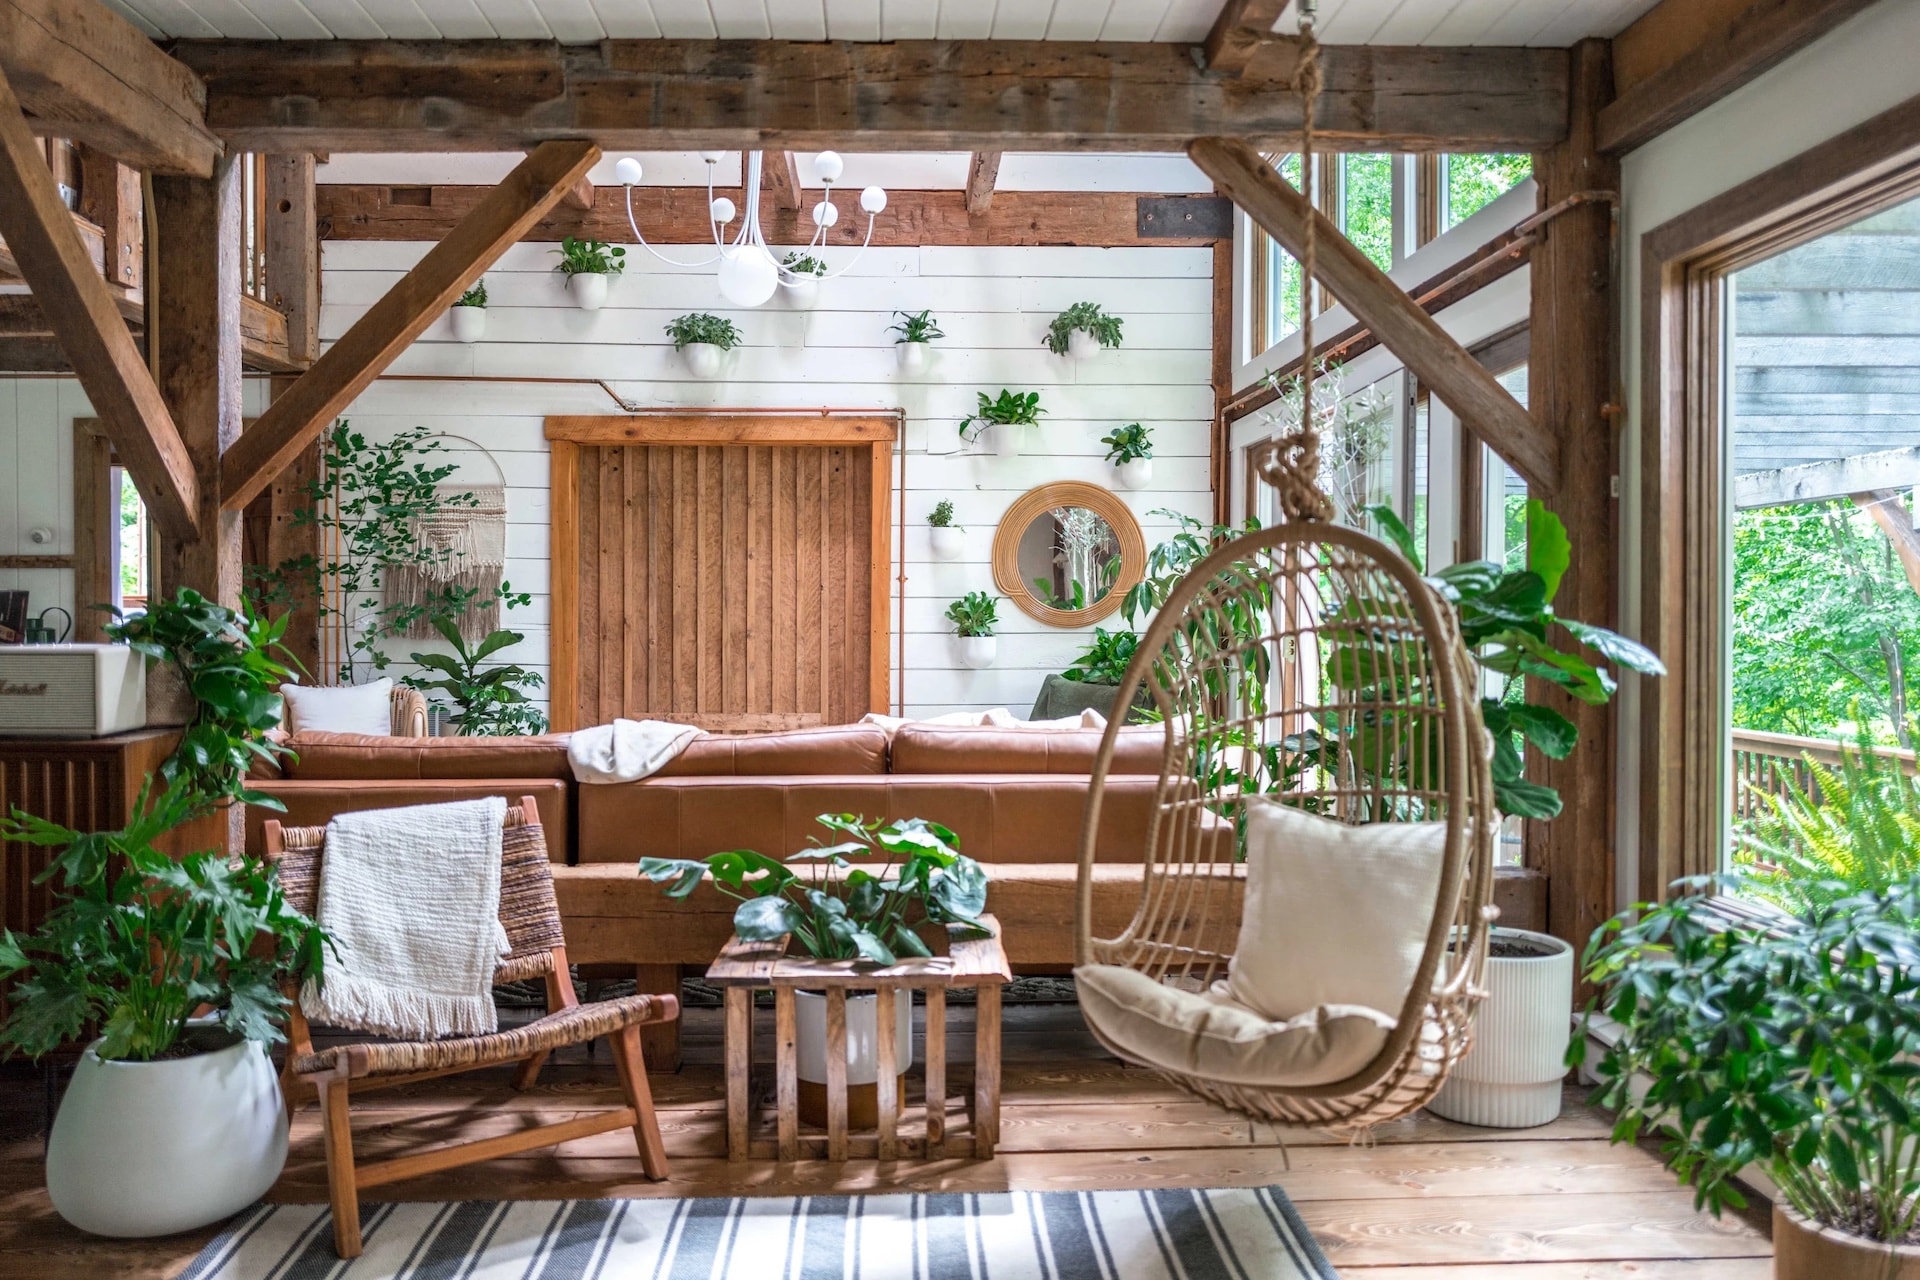 14 Helpful AirBnb Ideas To Make Your Property Stand Out And Get More Bookings